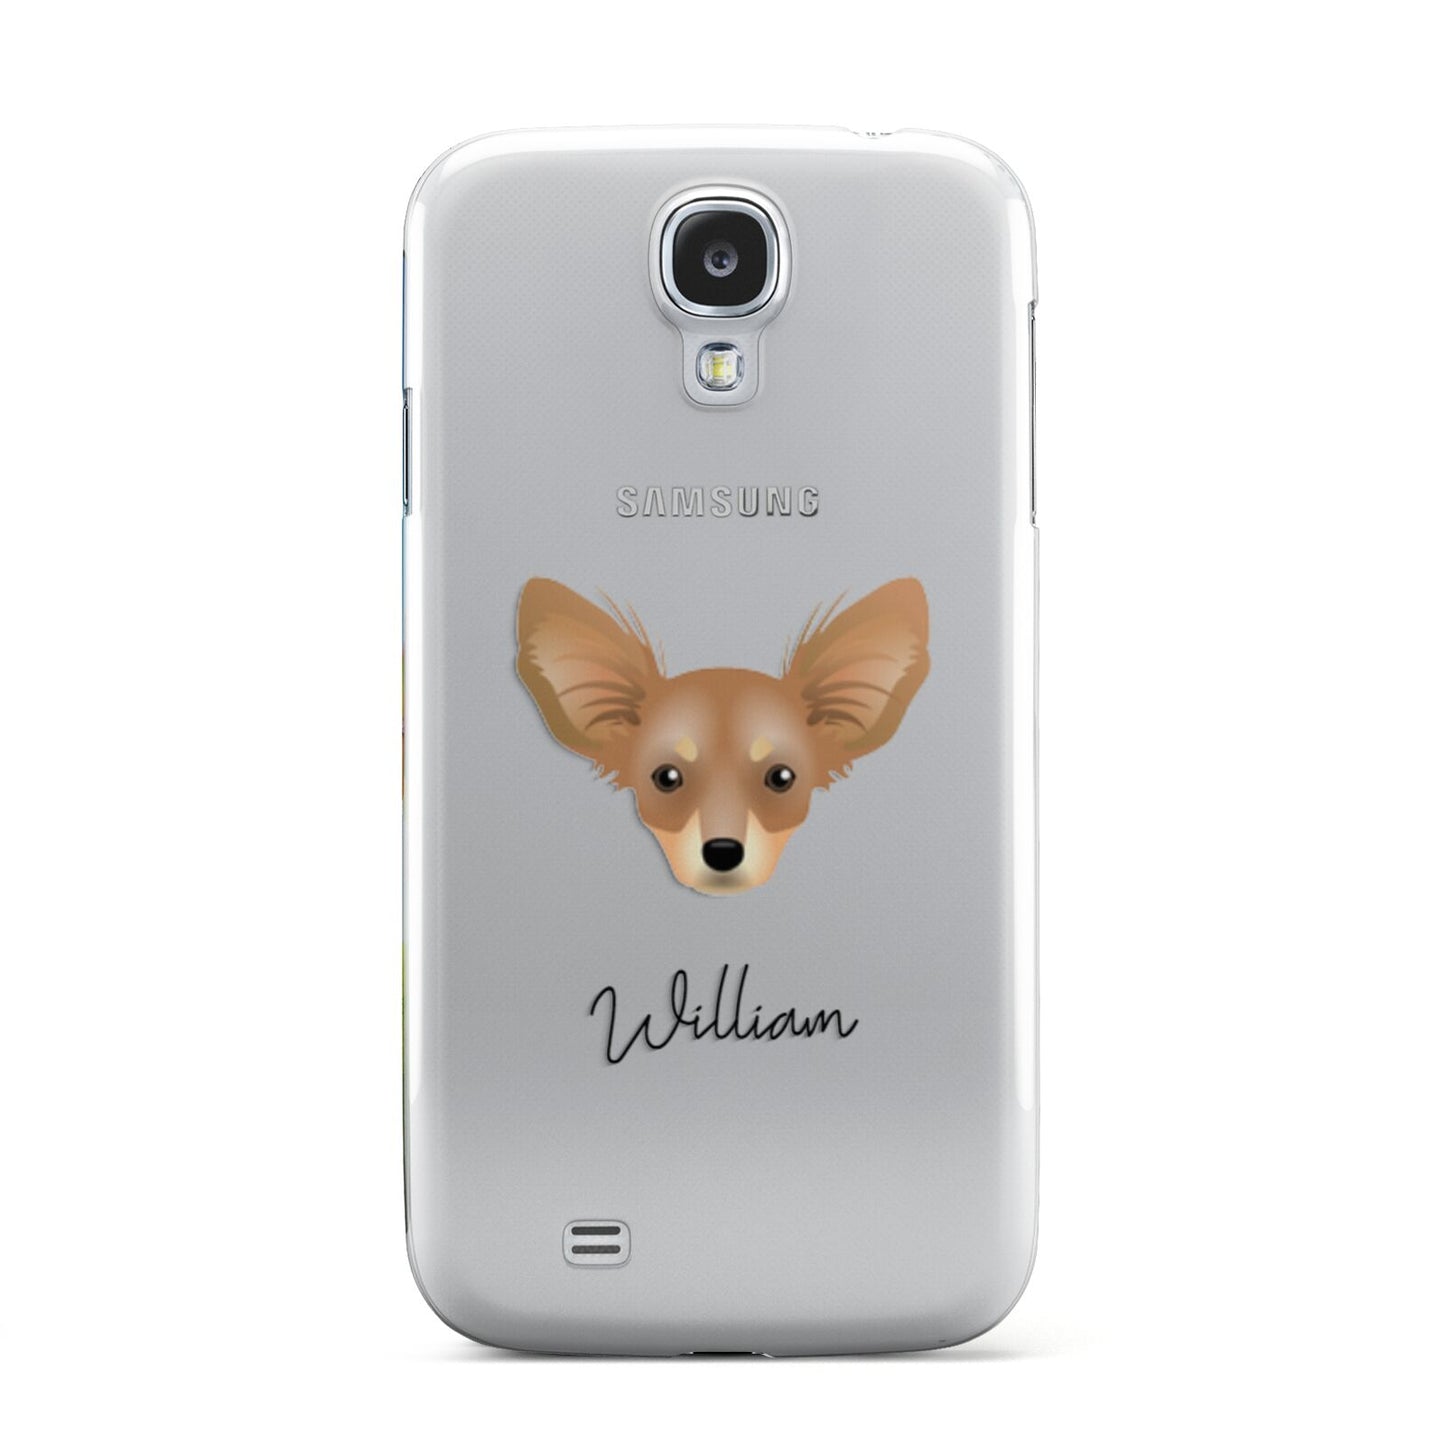 Russian Toy Personalised Samsung Galaxy S4 Case